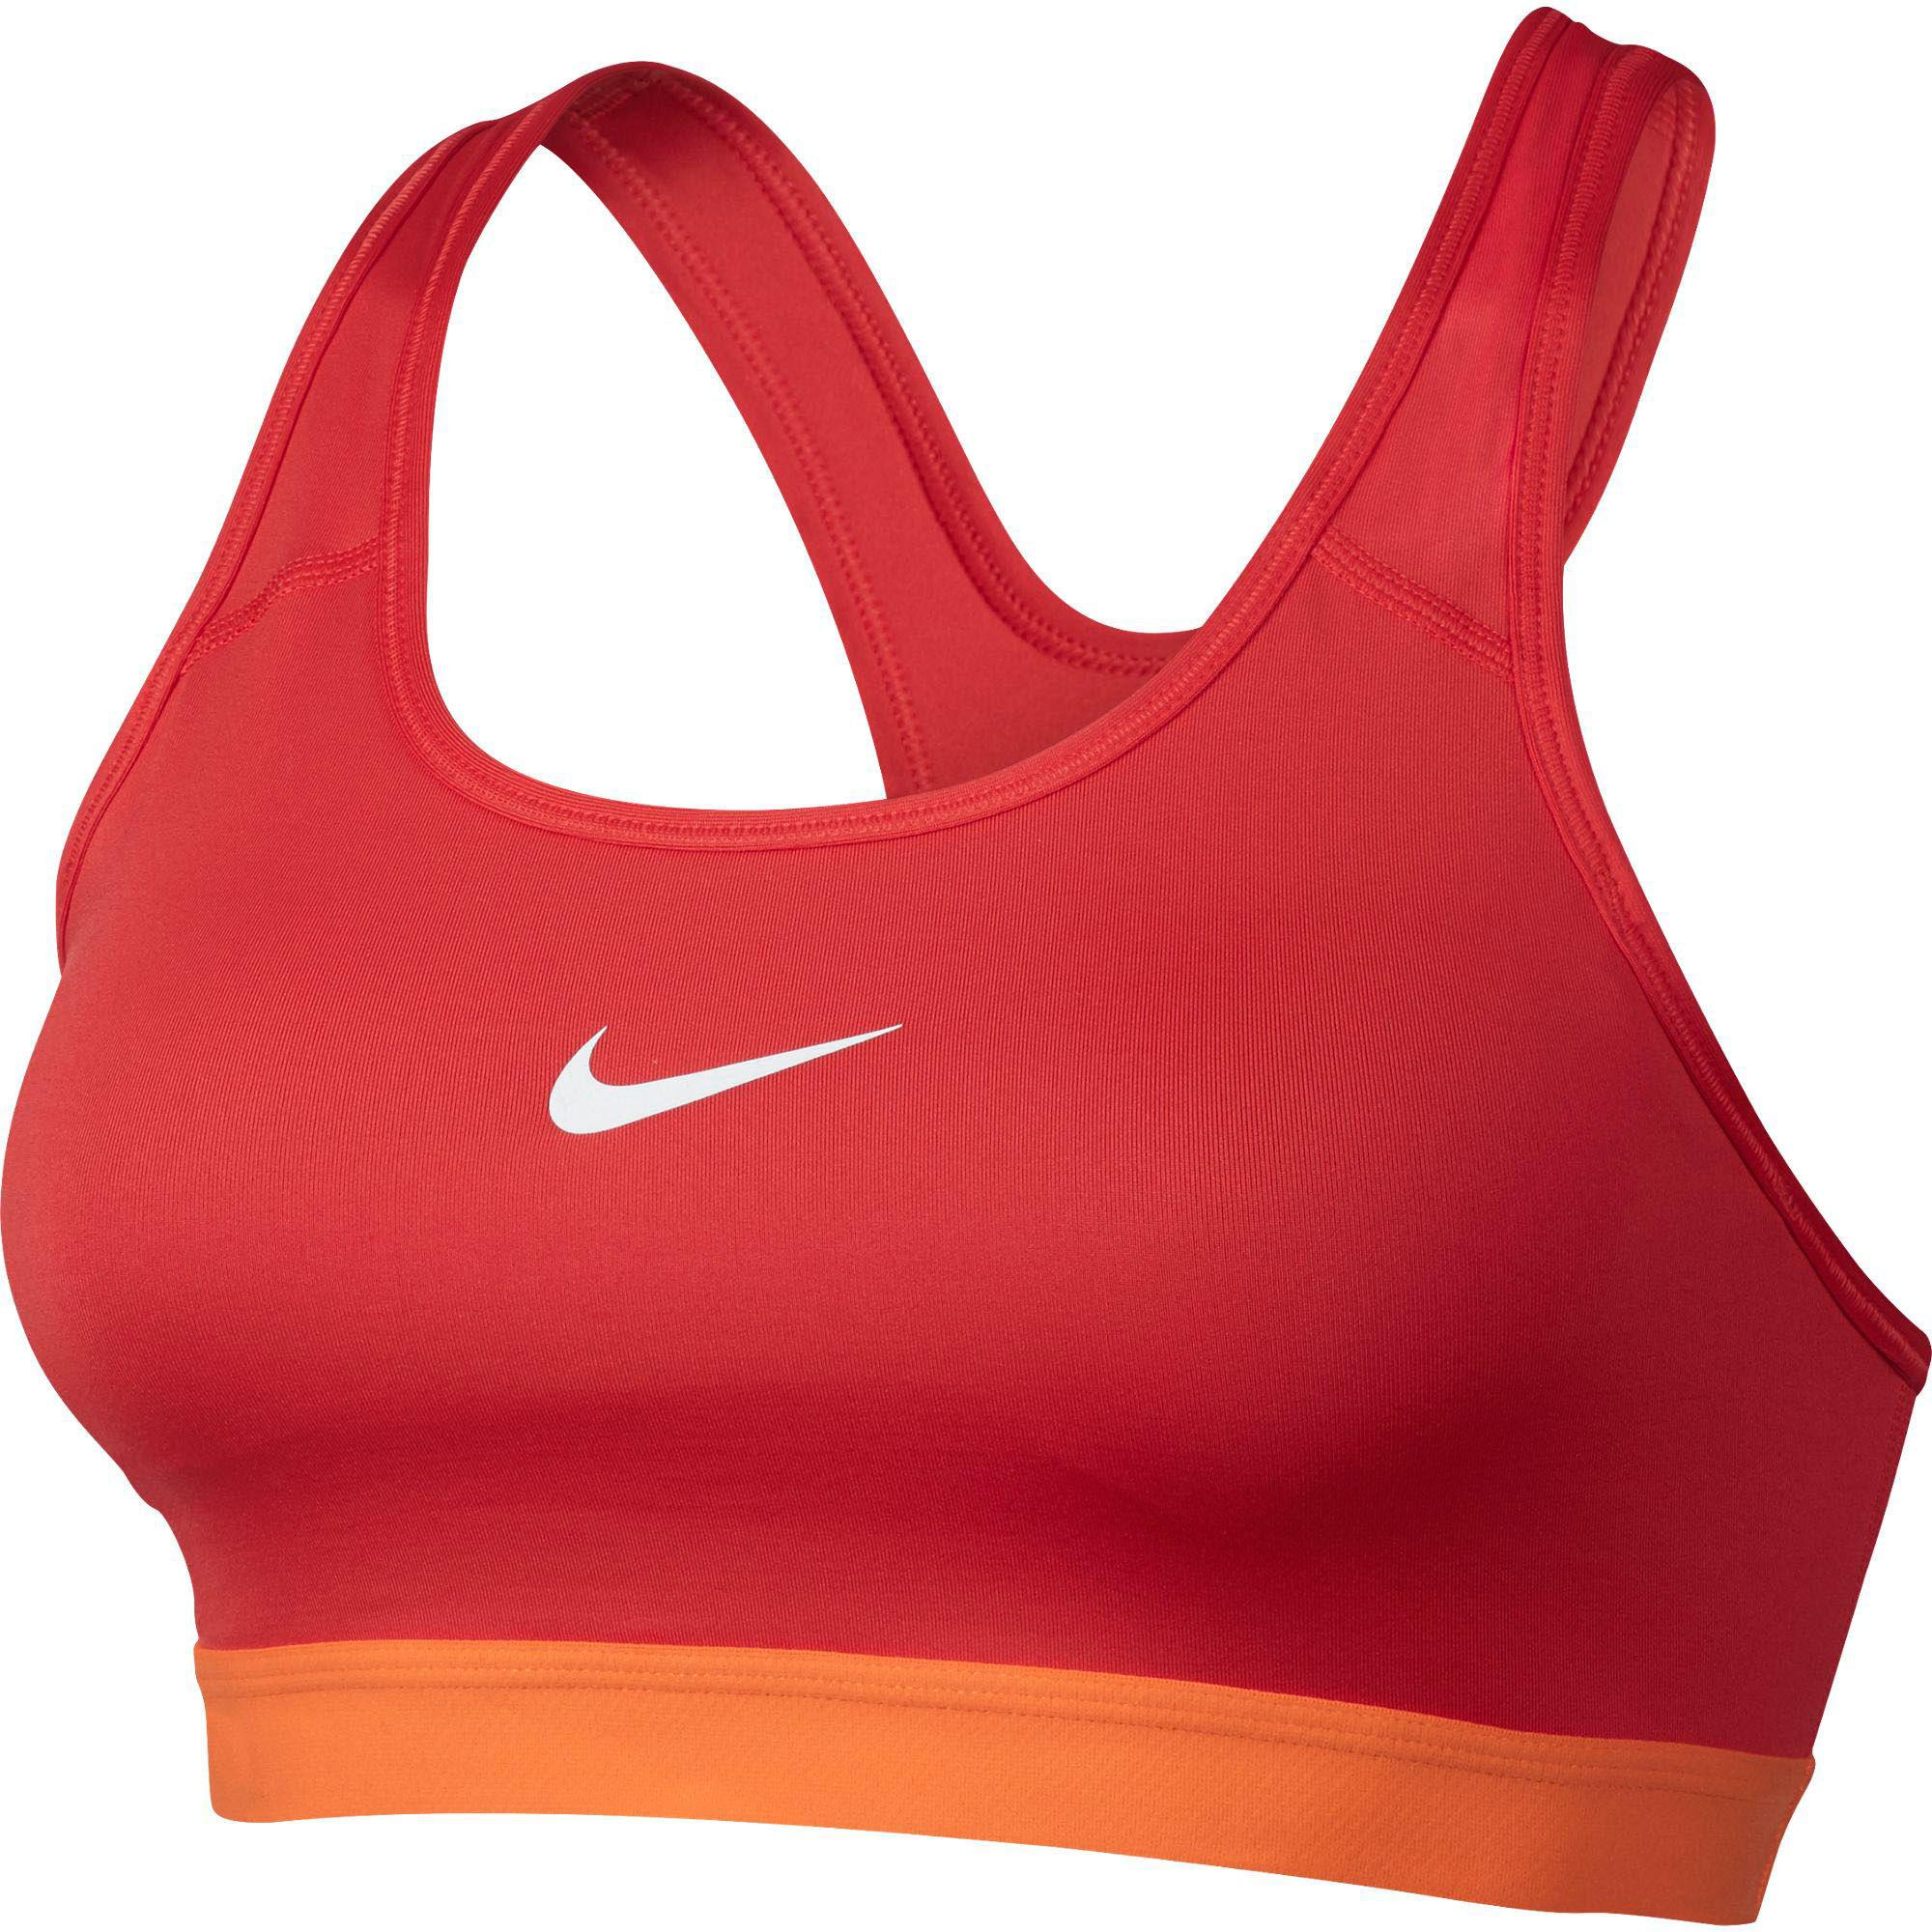 Nike Synthetic Pro Classic Padded Sports Bra in Red - Lyst